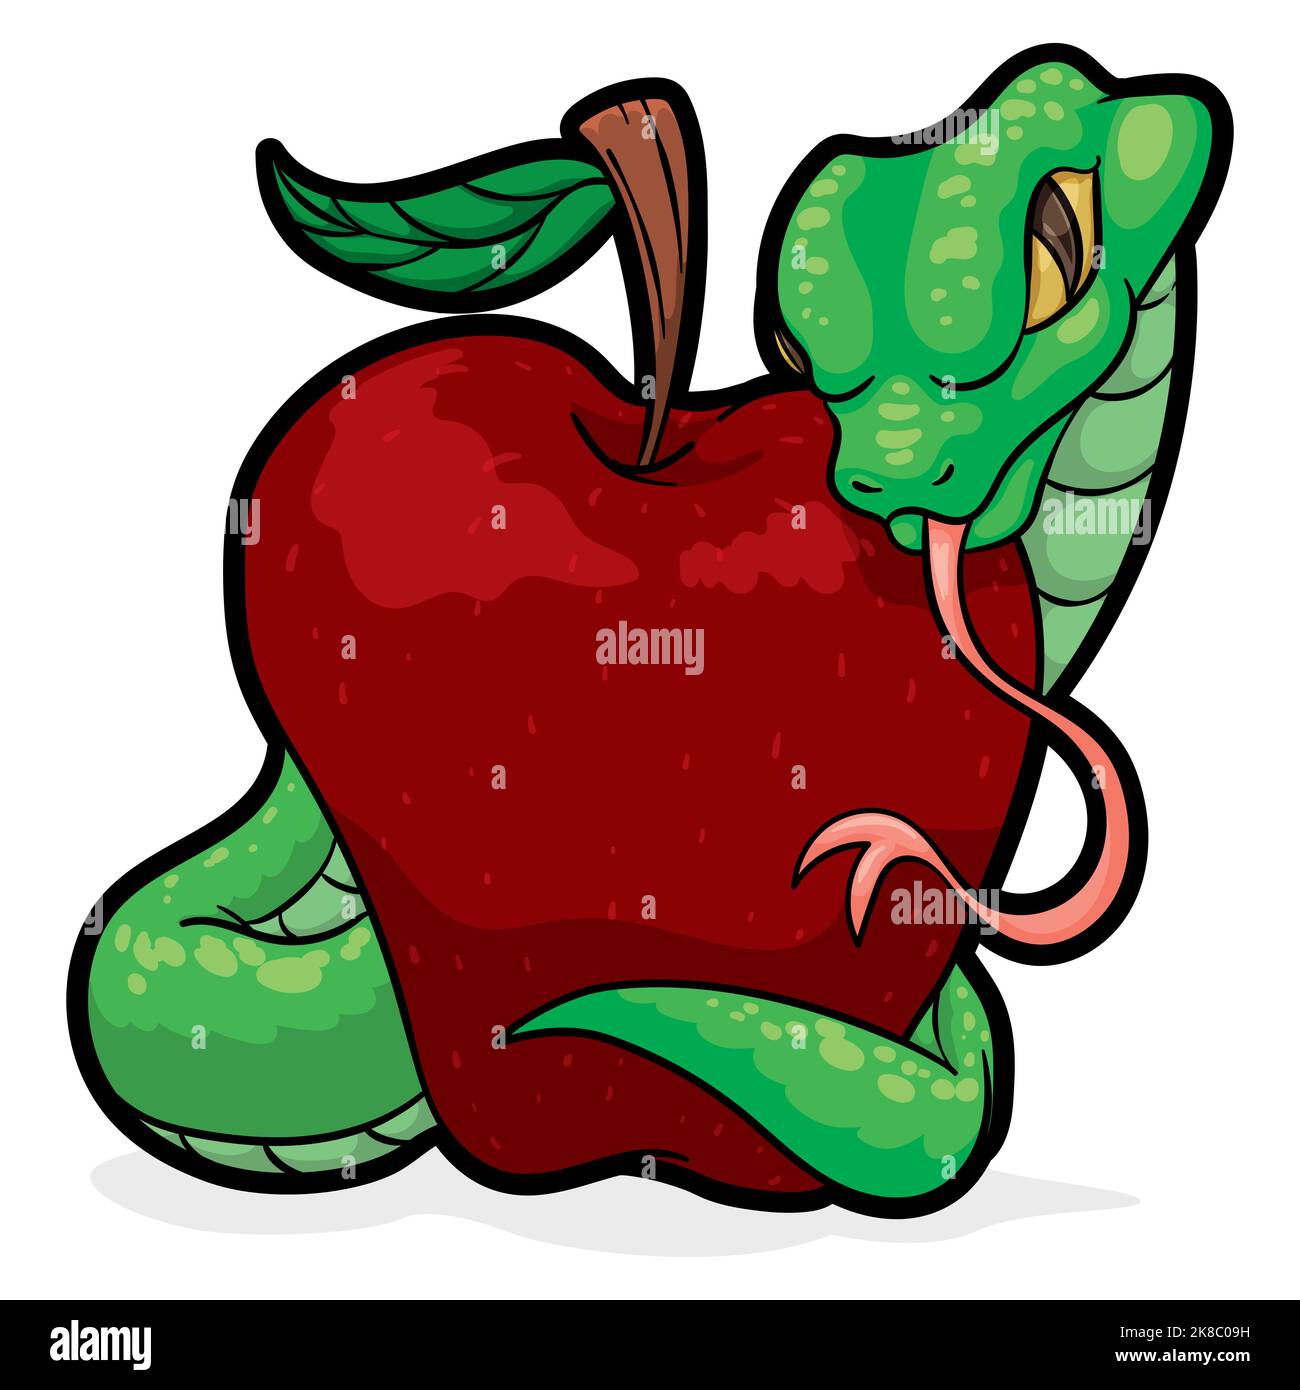 Green snake tempting you with a red apple like the biblical story. Stock Vector